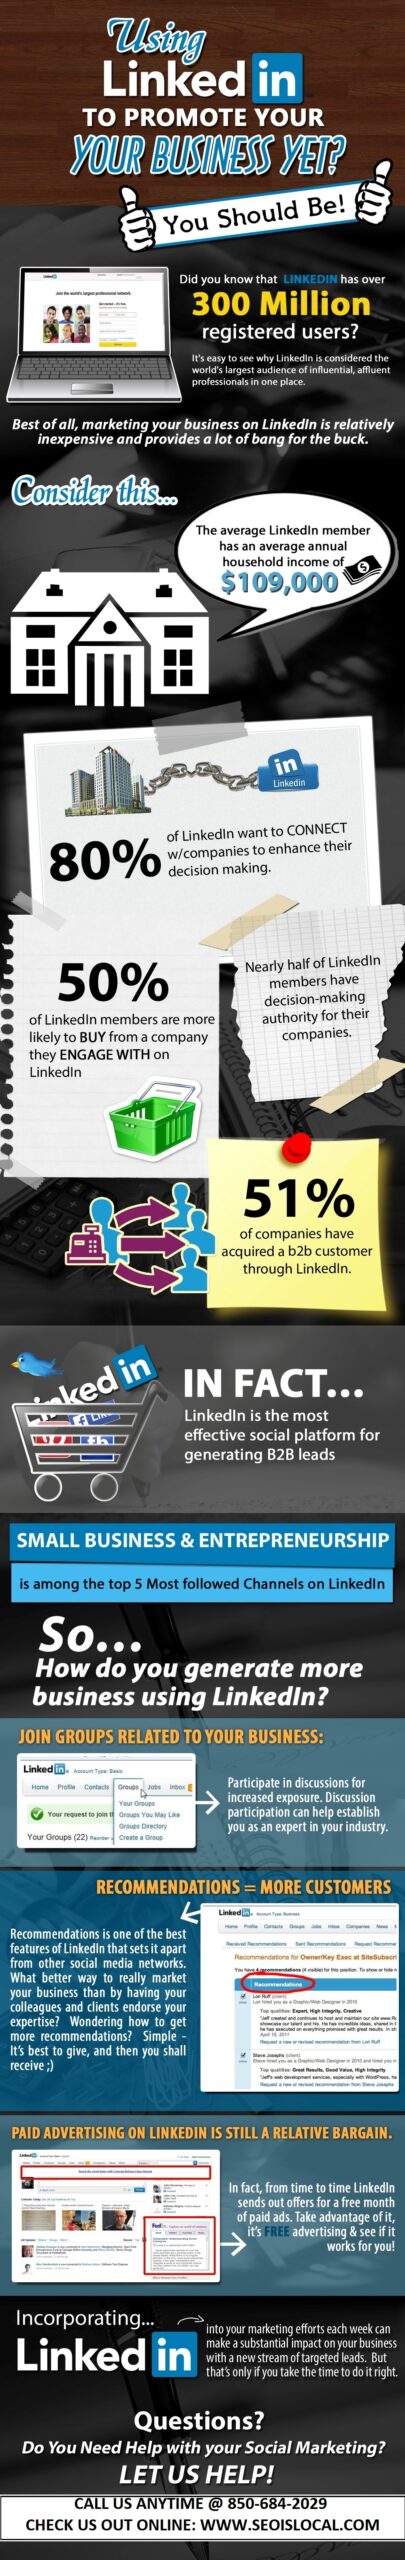 Are You Using LinkedIn to Promote Your Business Yet?